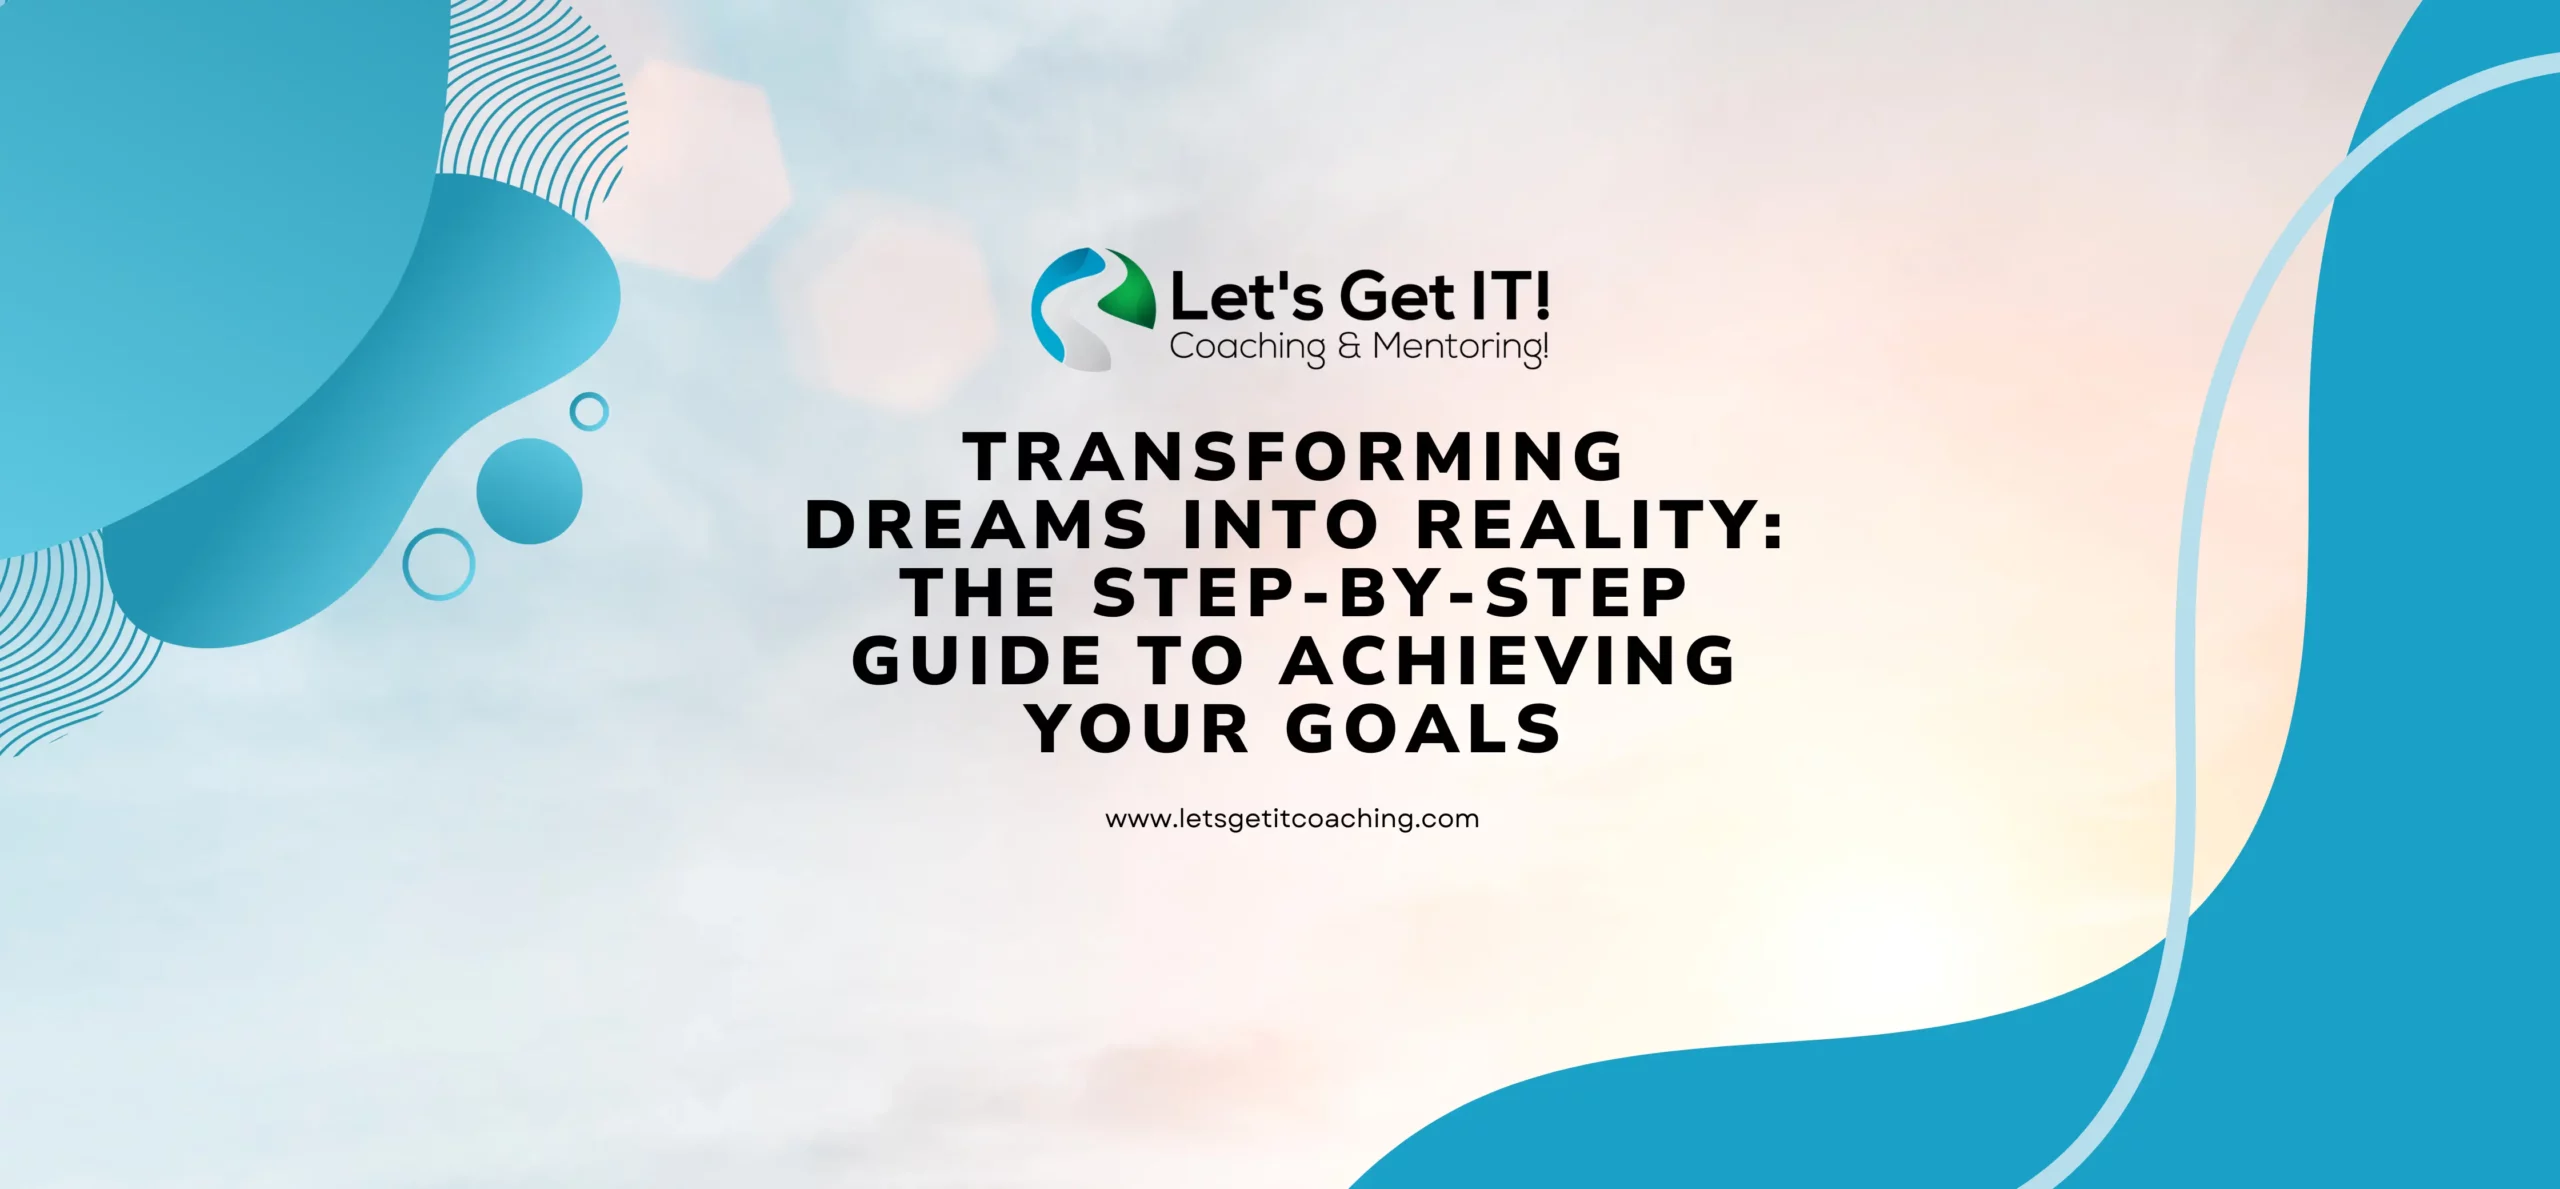 Transforming Dreams into Reality: The Step-by-Step Guide to Achieving Your Goals